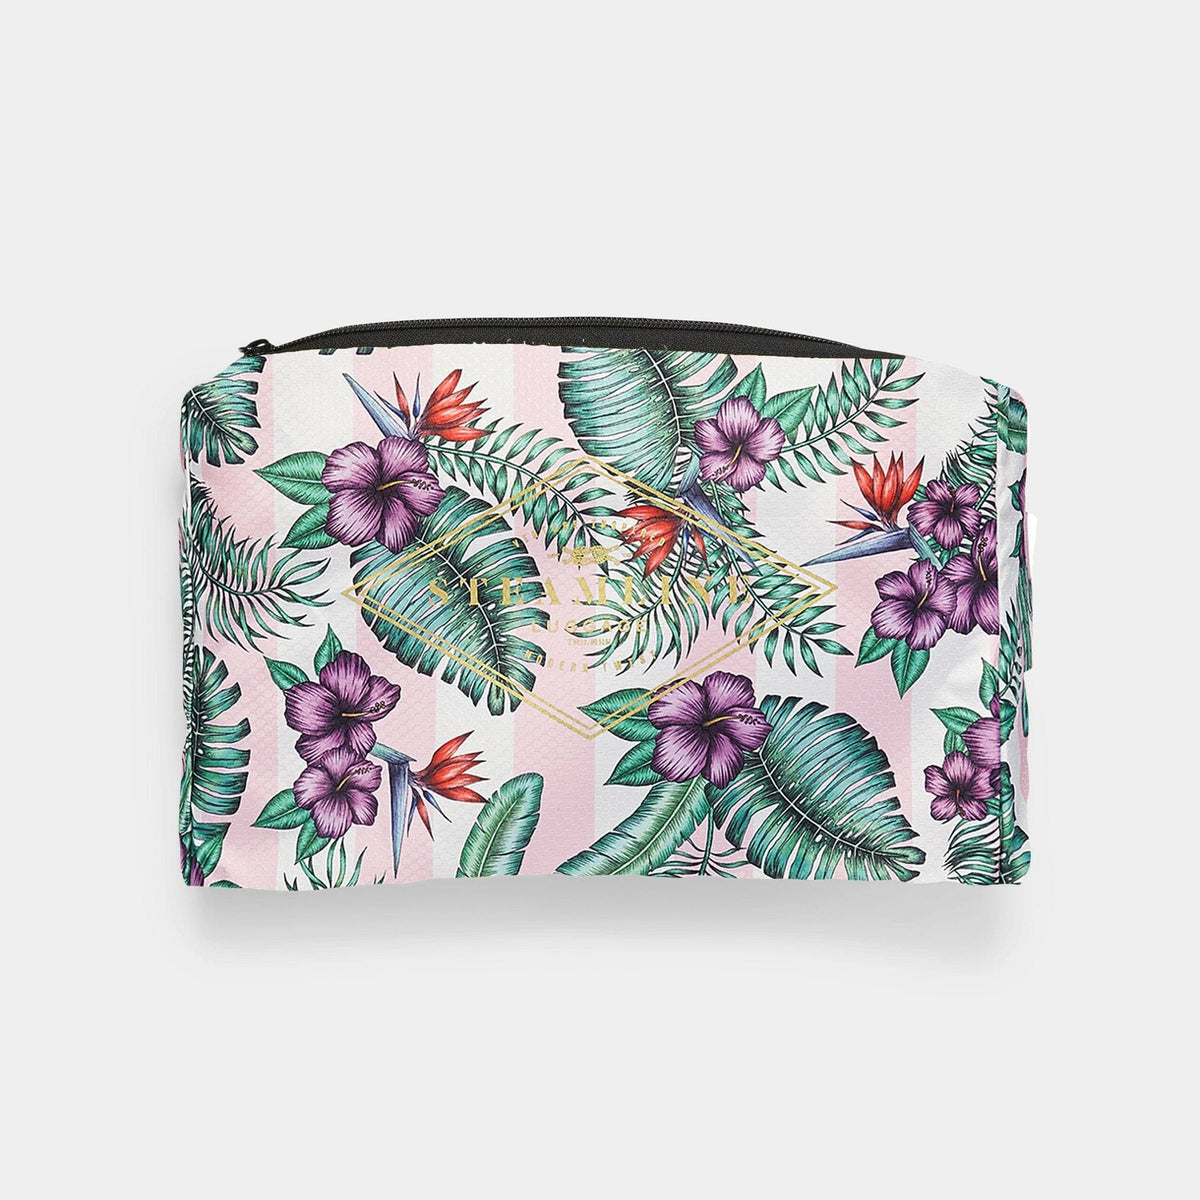 The Botanist Protective Cover - Carryon Size Protective Cover Steamline Luggage 